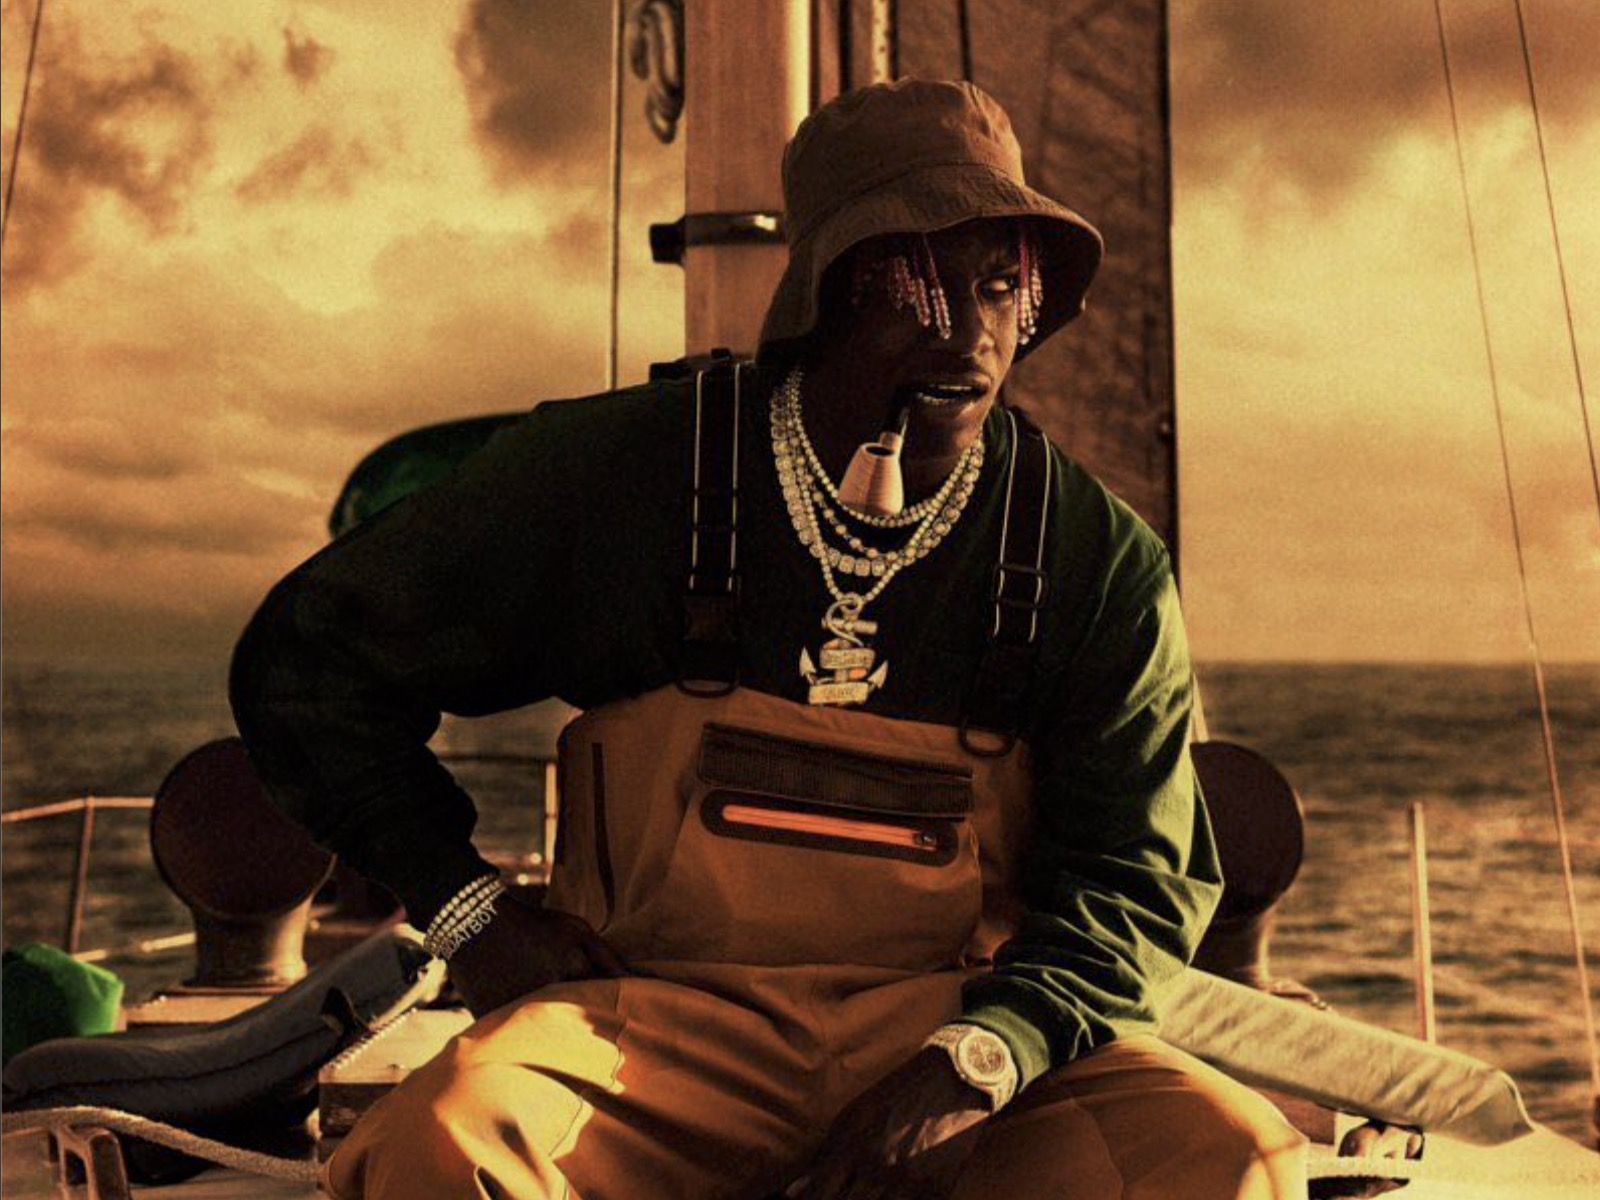 lil yachty on a boat